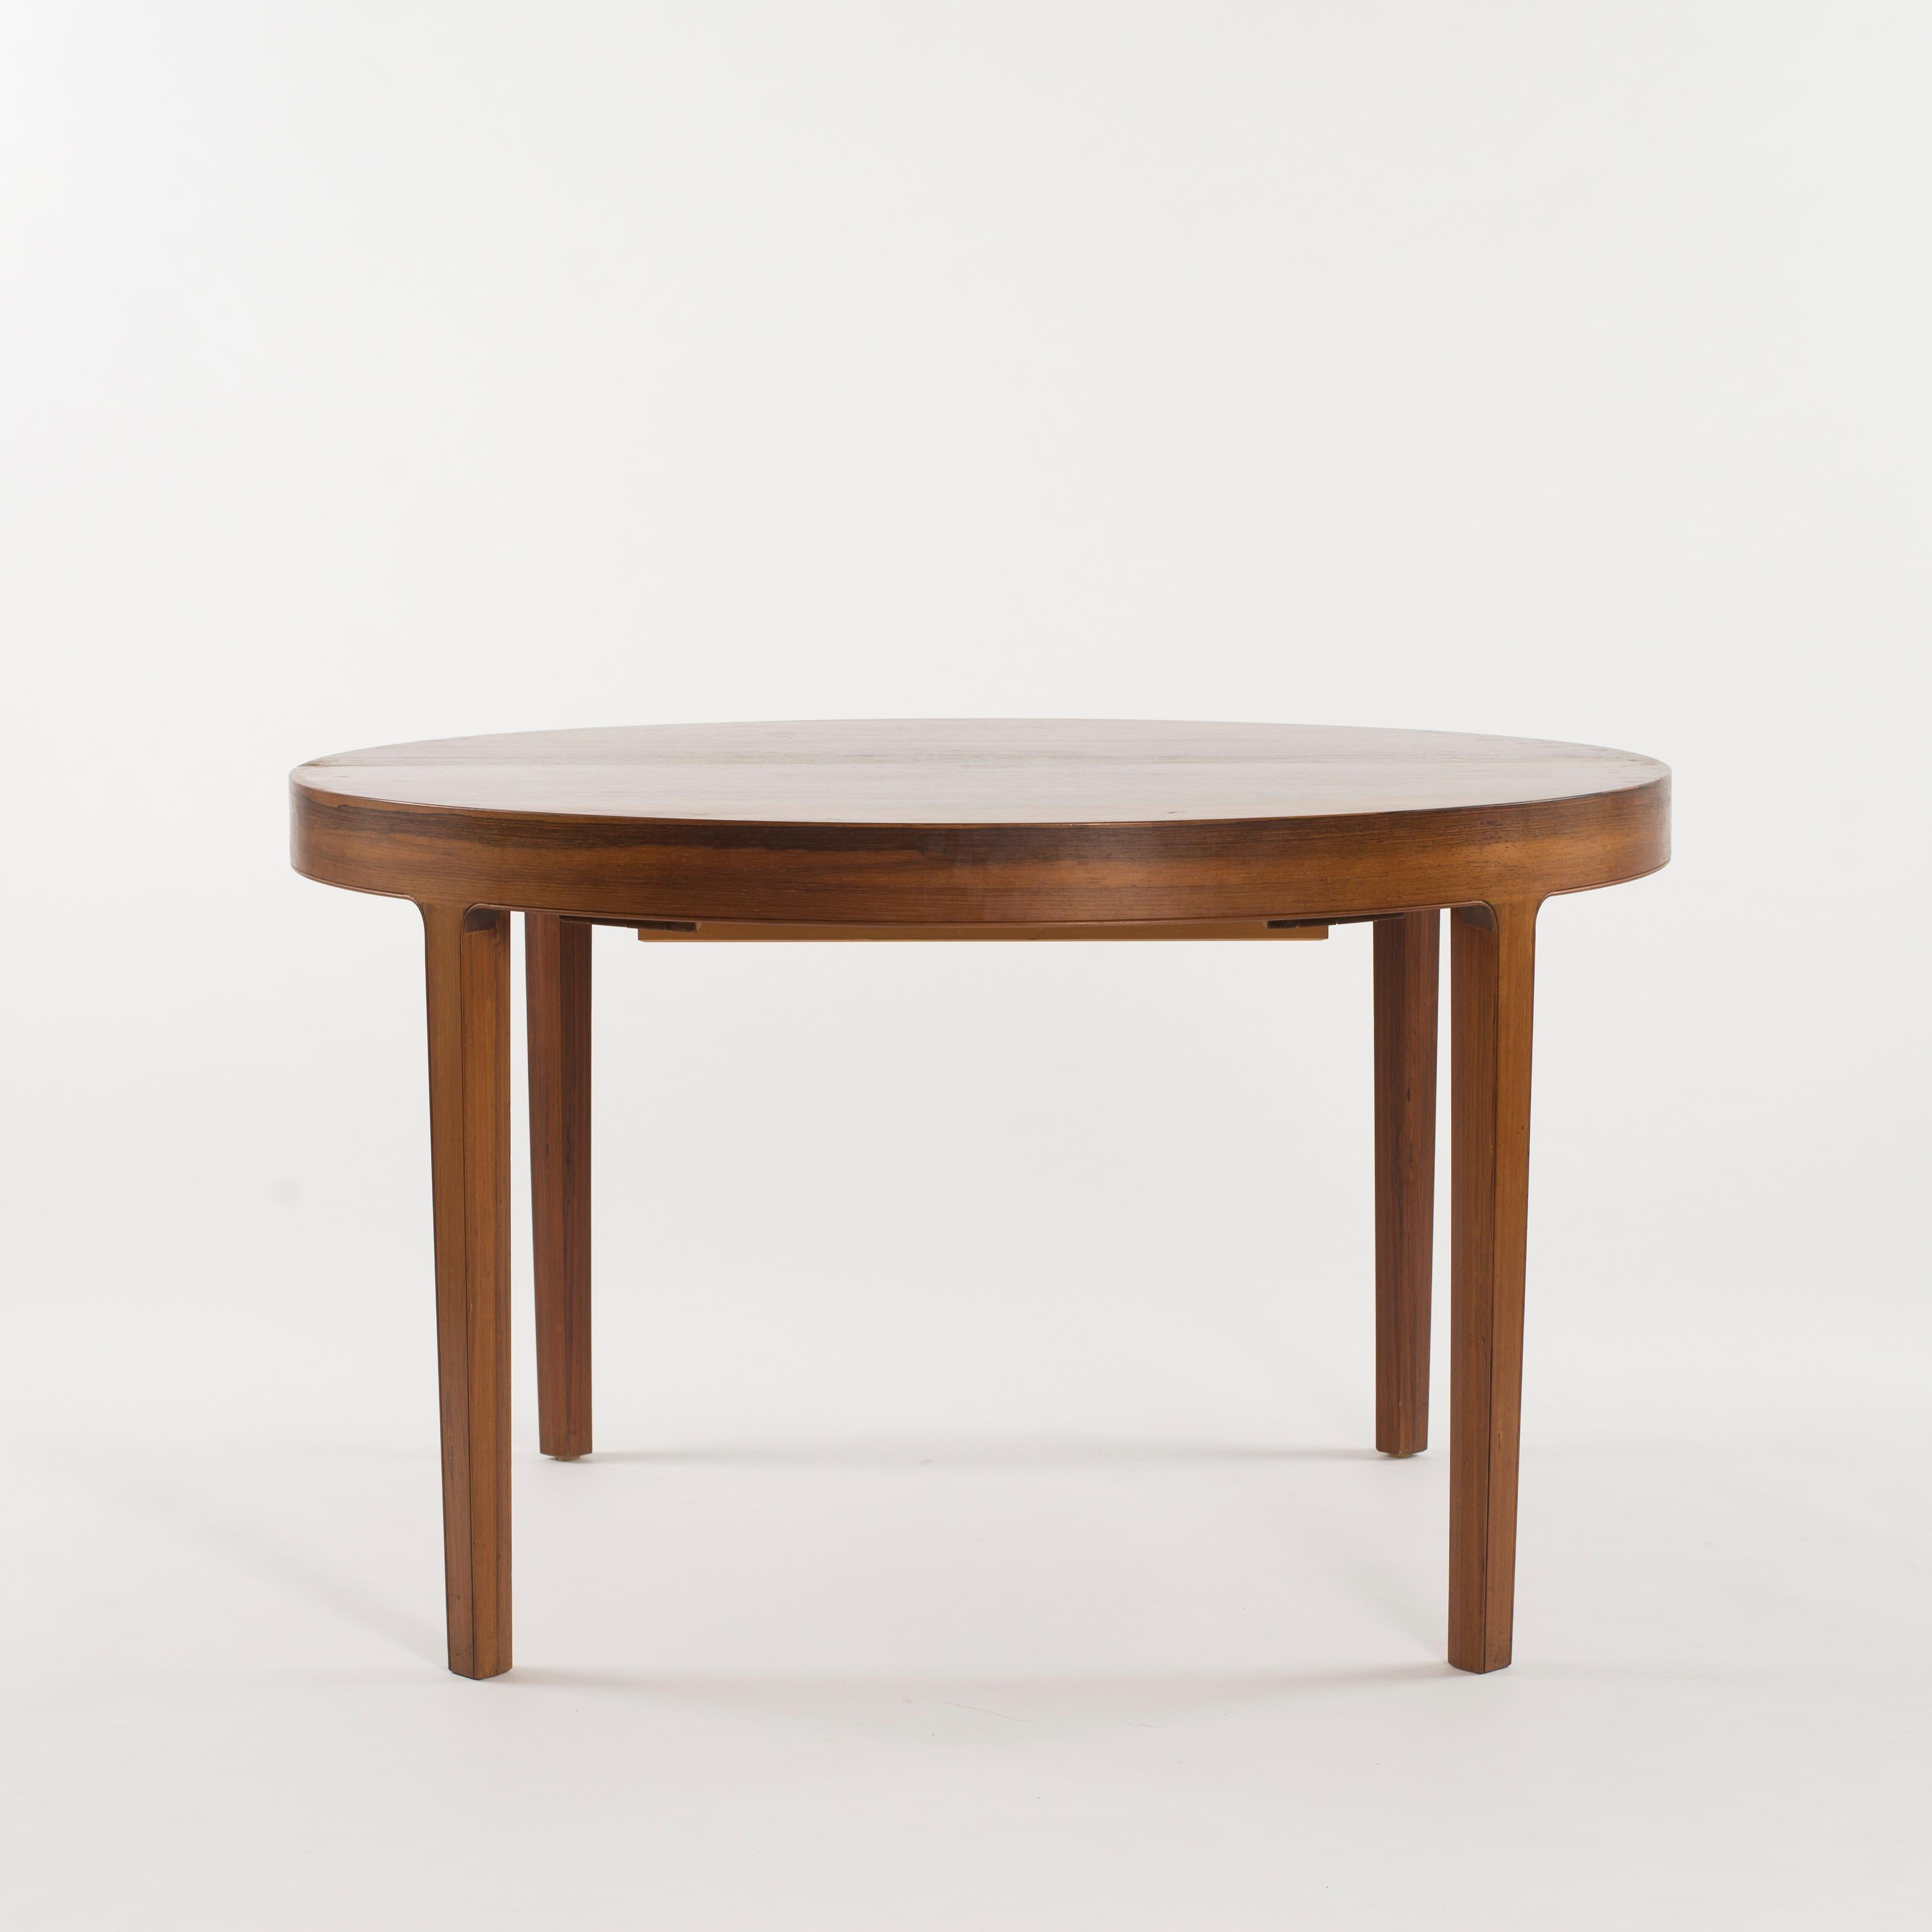 Ole Wanscher extendable dining table in rosewood. Executed by A. J. Iversen for Illums Bolighus.